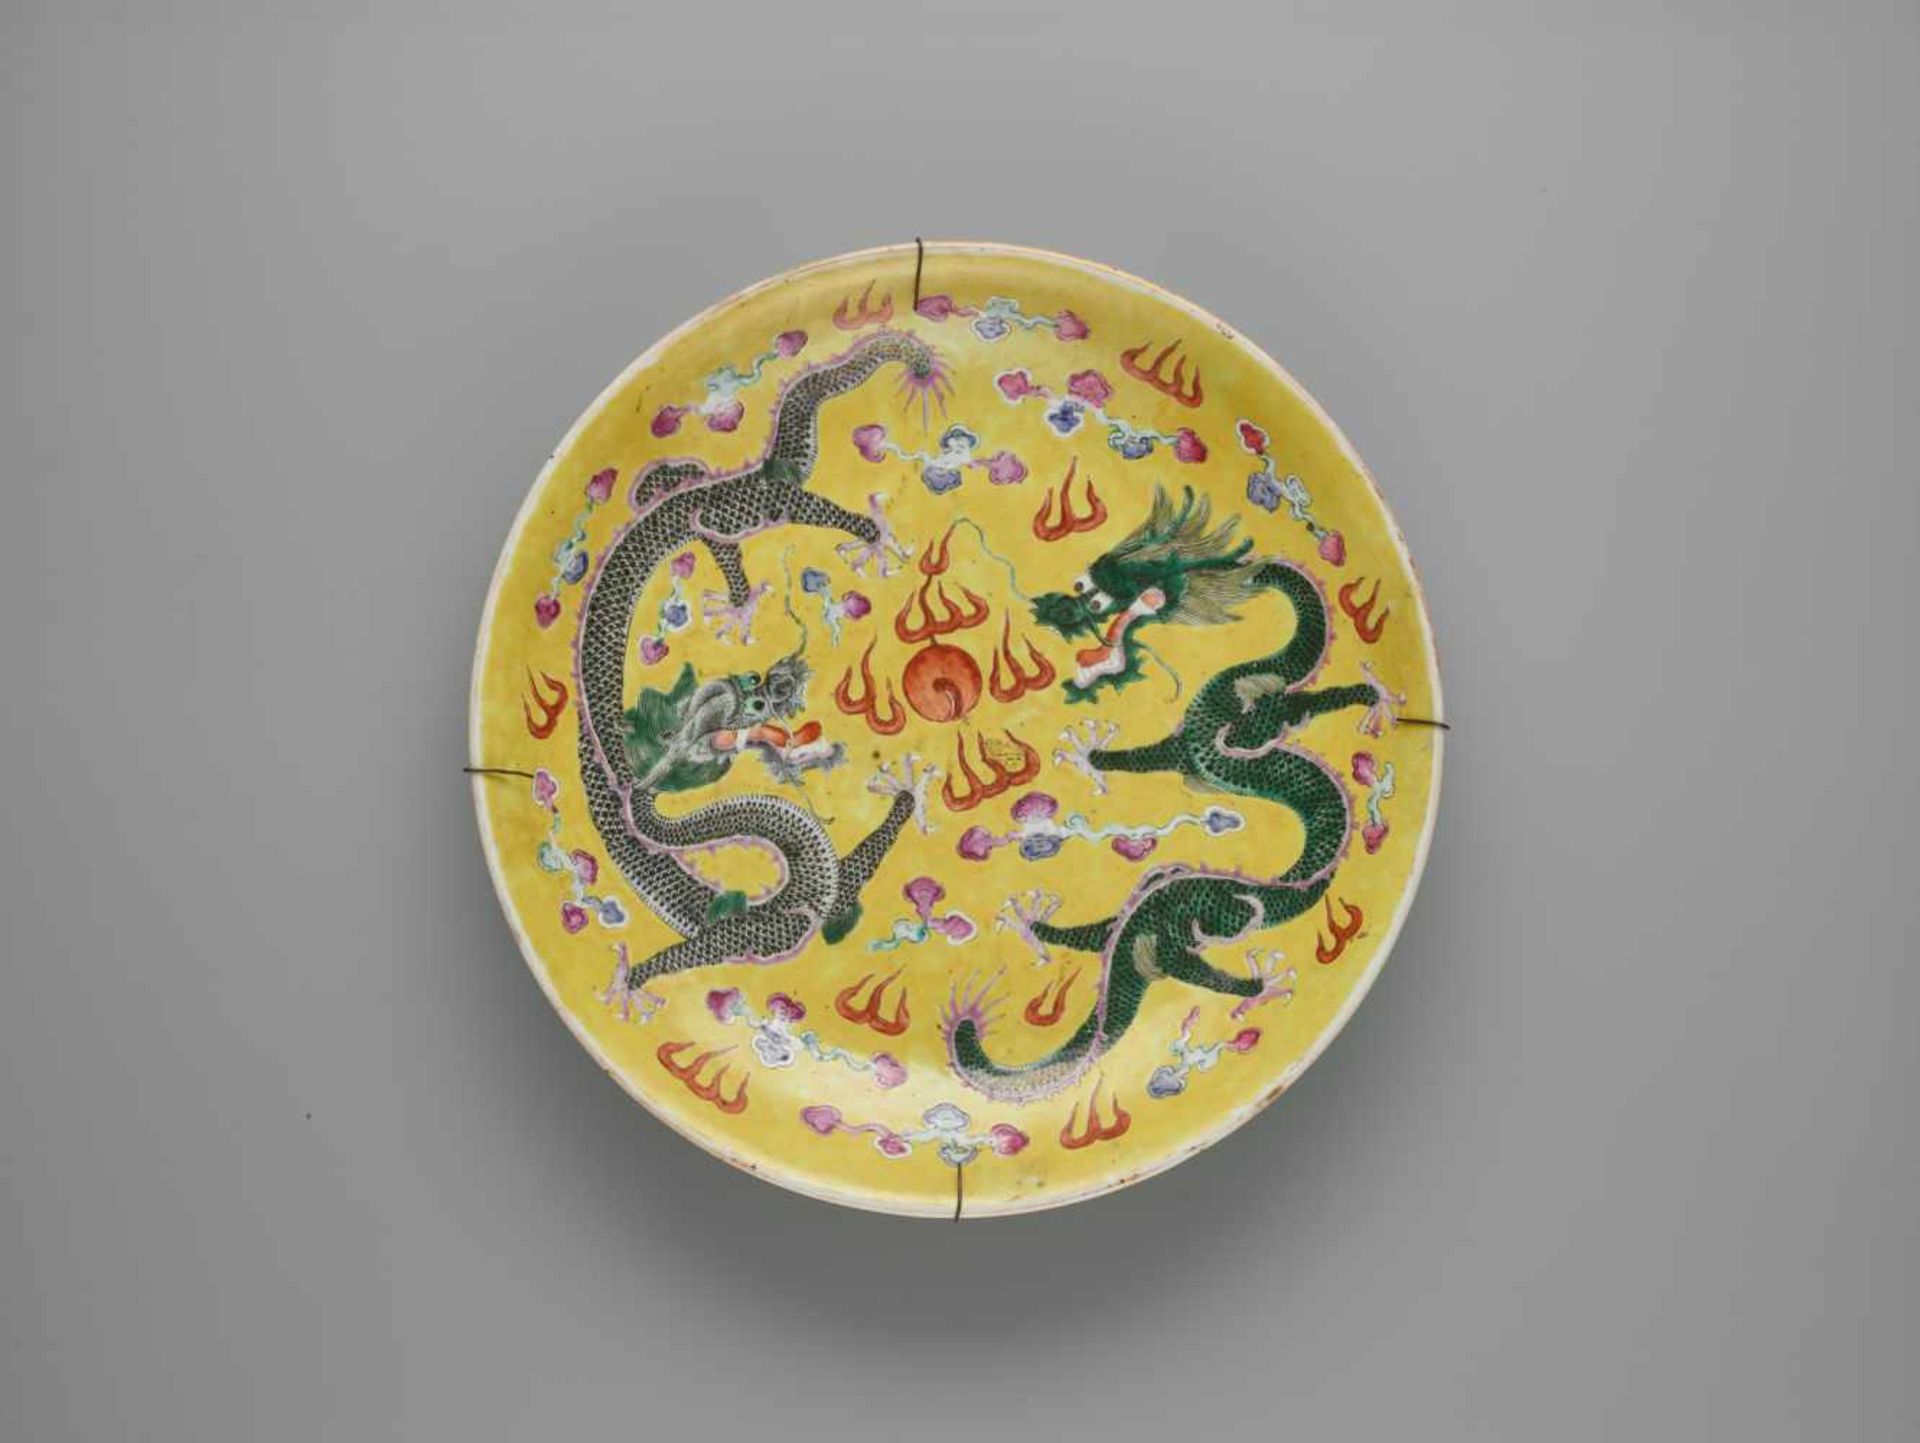 A ‘DRAGON’ PORCELAIN CHARGER, LATE QING DYNASTYThe massively potted plate painted in polychrome